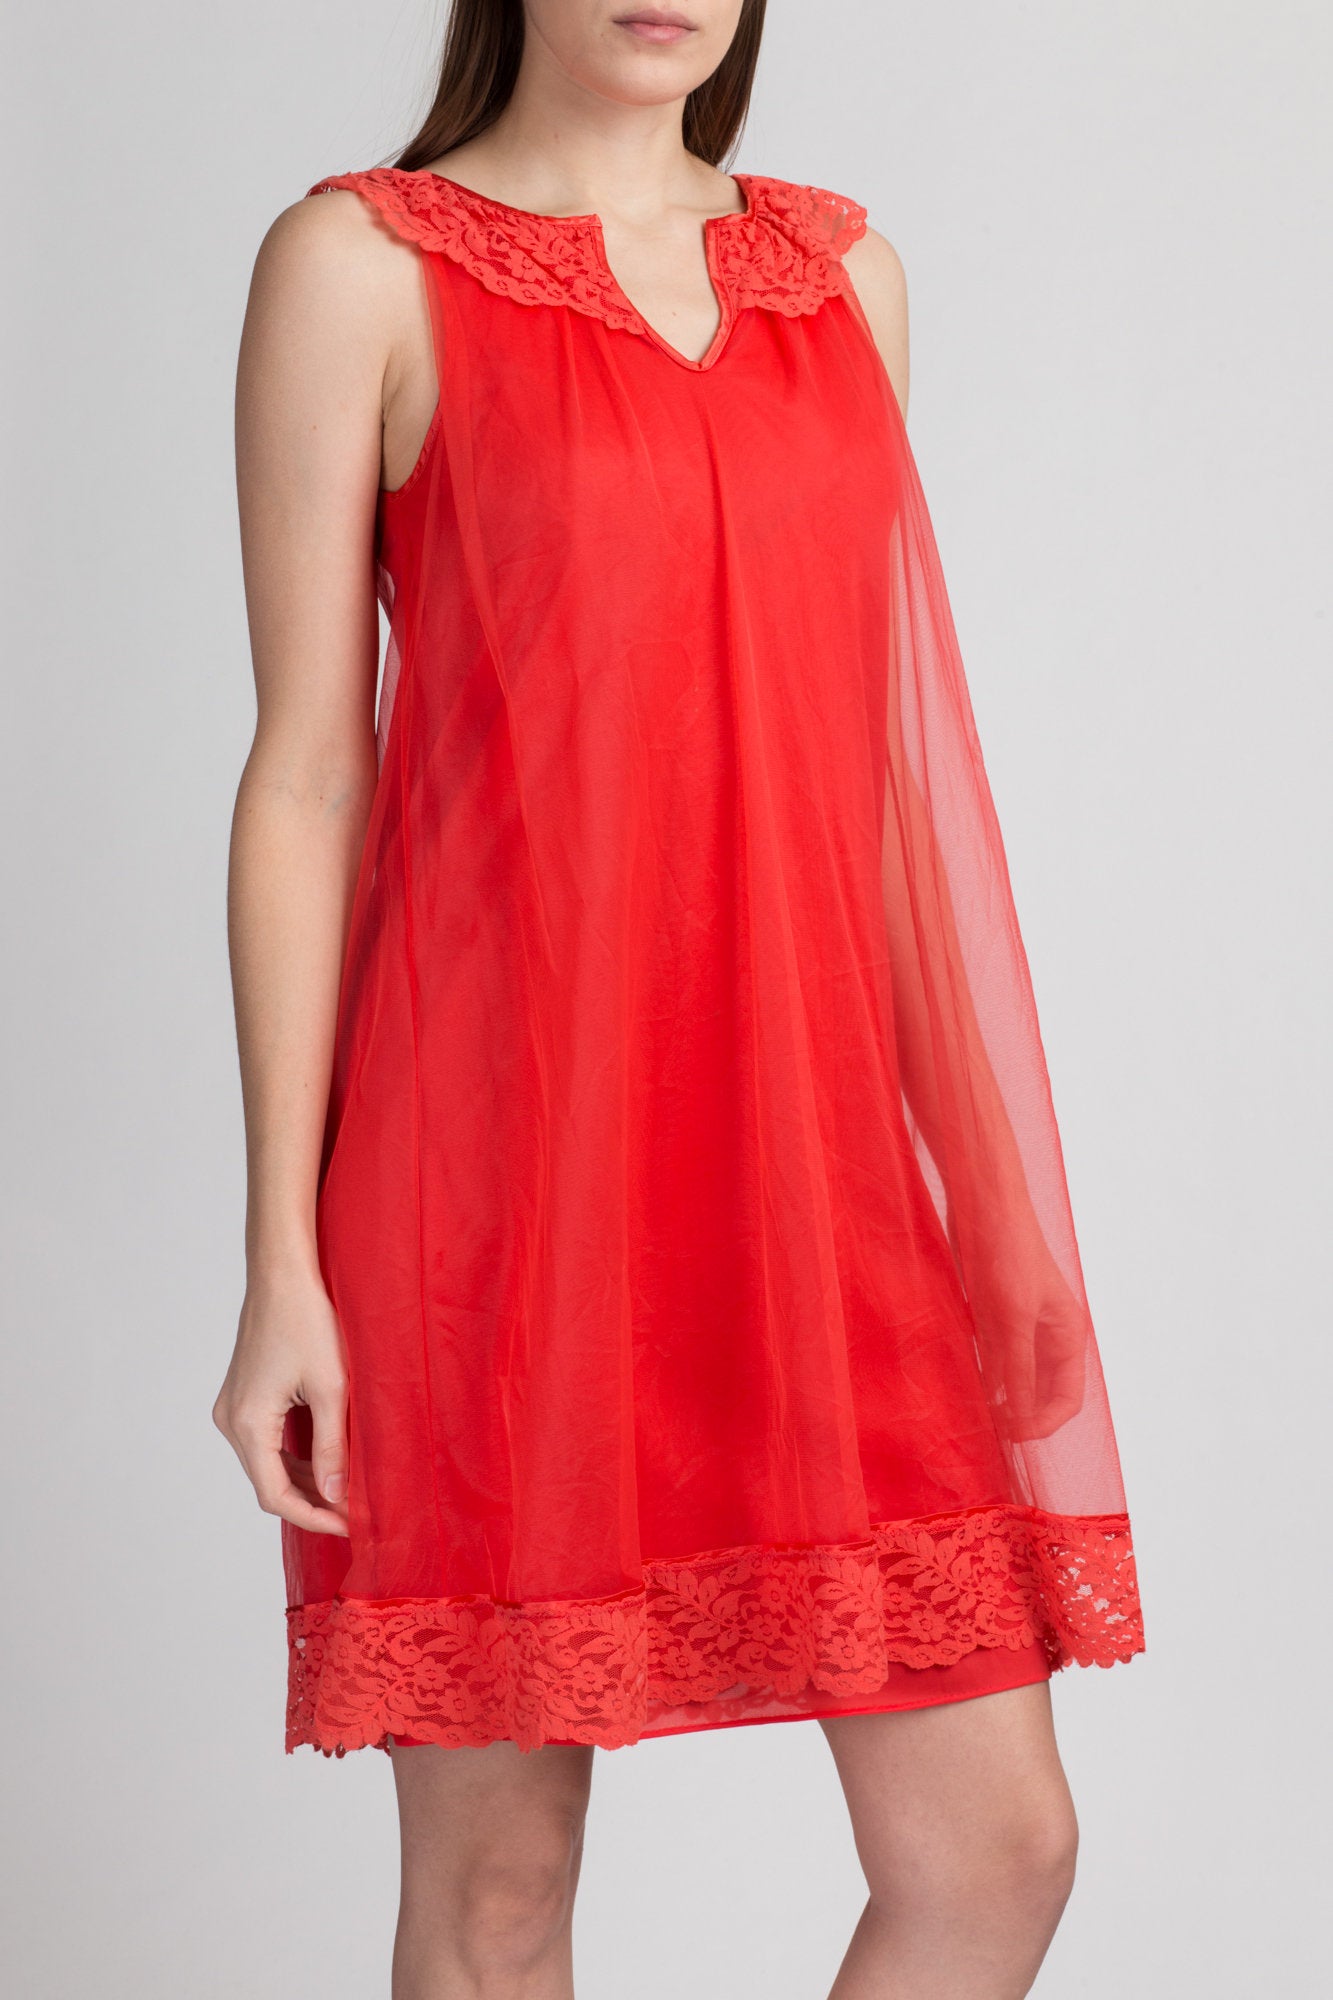 Vintage 60s Red Mini Nightie - Small | Lace Trim Sleeveless Tent Nightgown